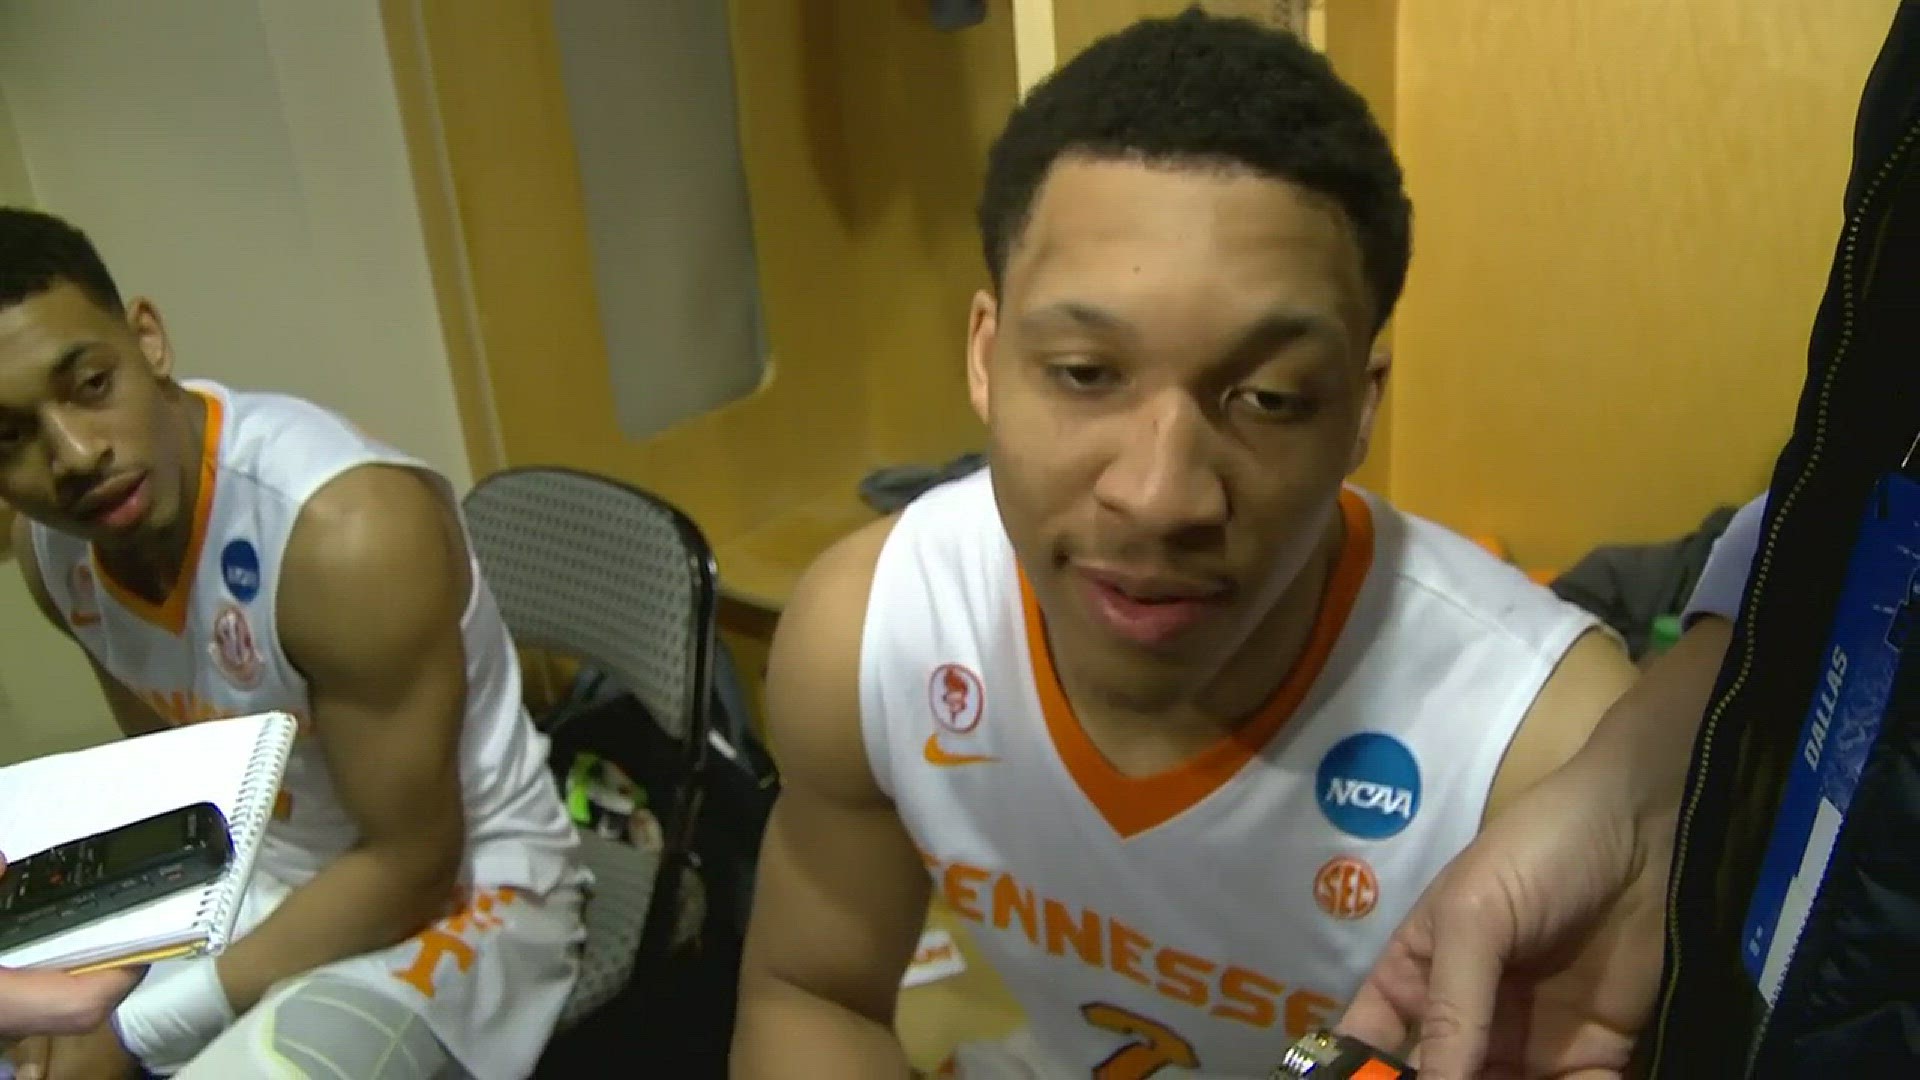 Admiral Schofield threw down a one-handed slam over two Raiders in the last few minutes of Tennessee's 73-47 win over Wright State in the first round of the NCAA Tournament. His teammates enjoyed it.